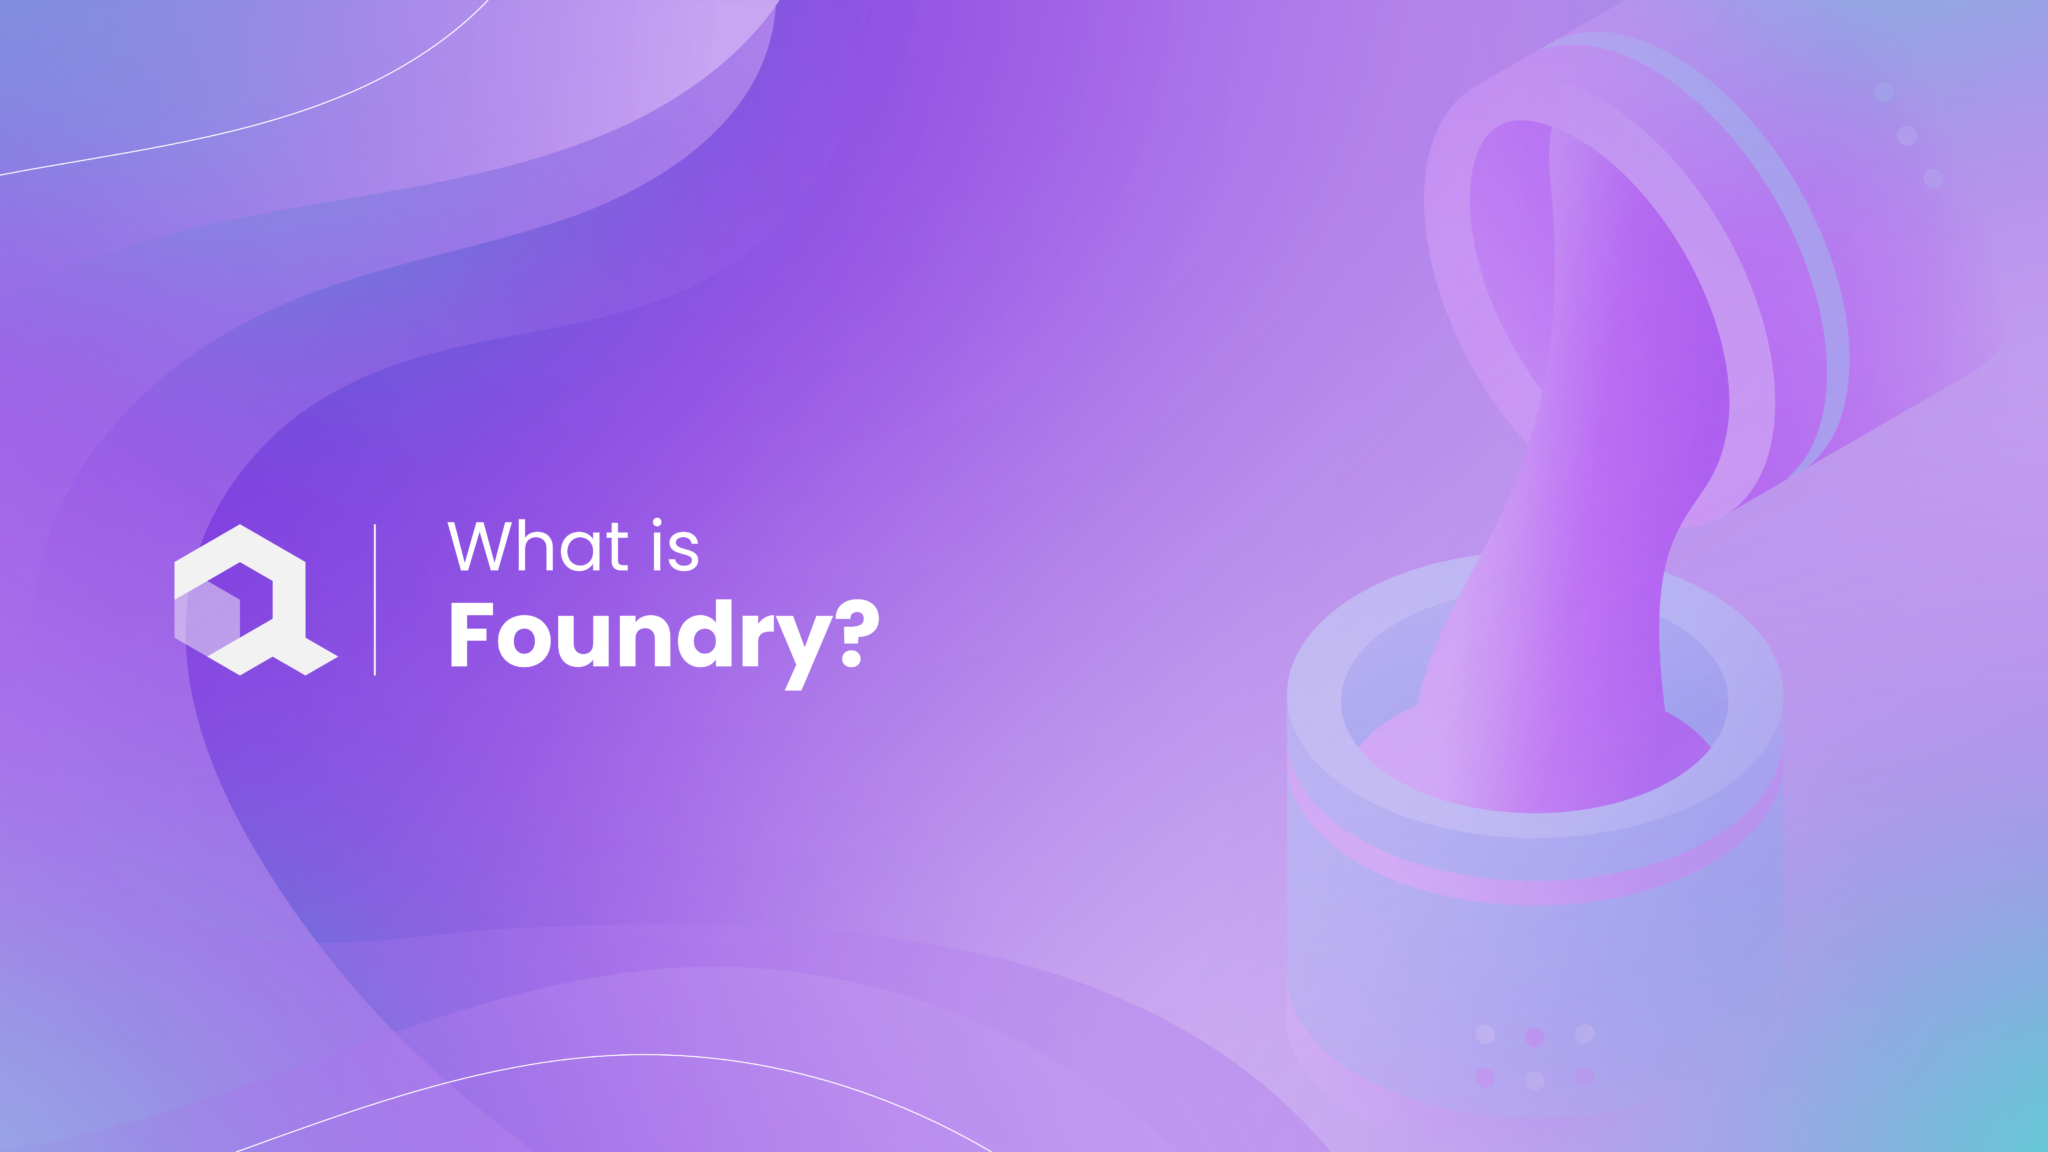 What is Foundry?